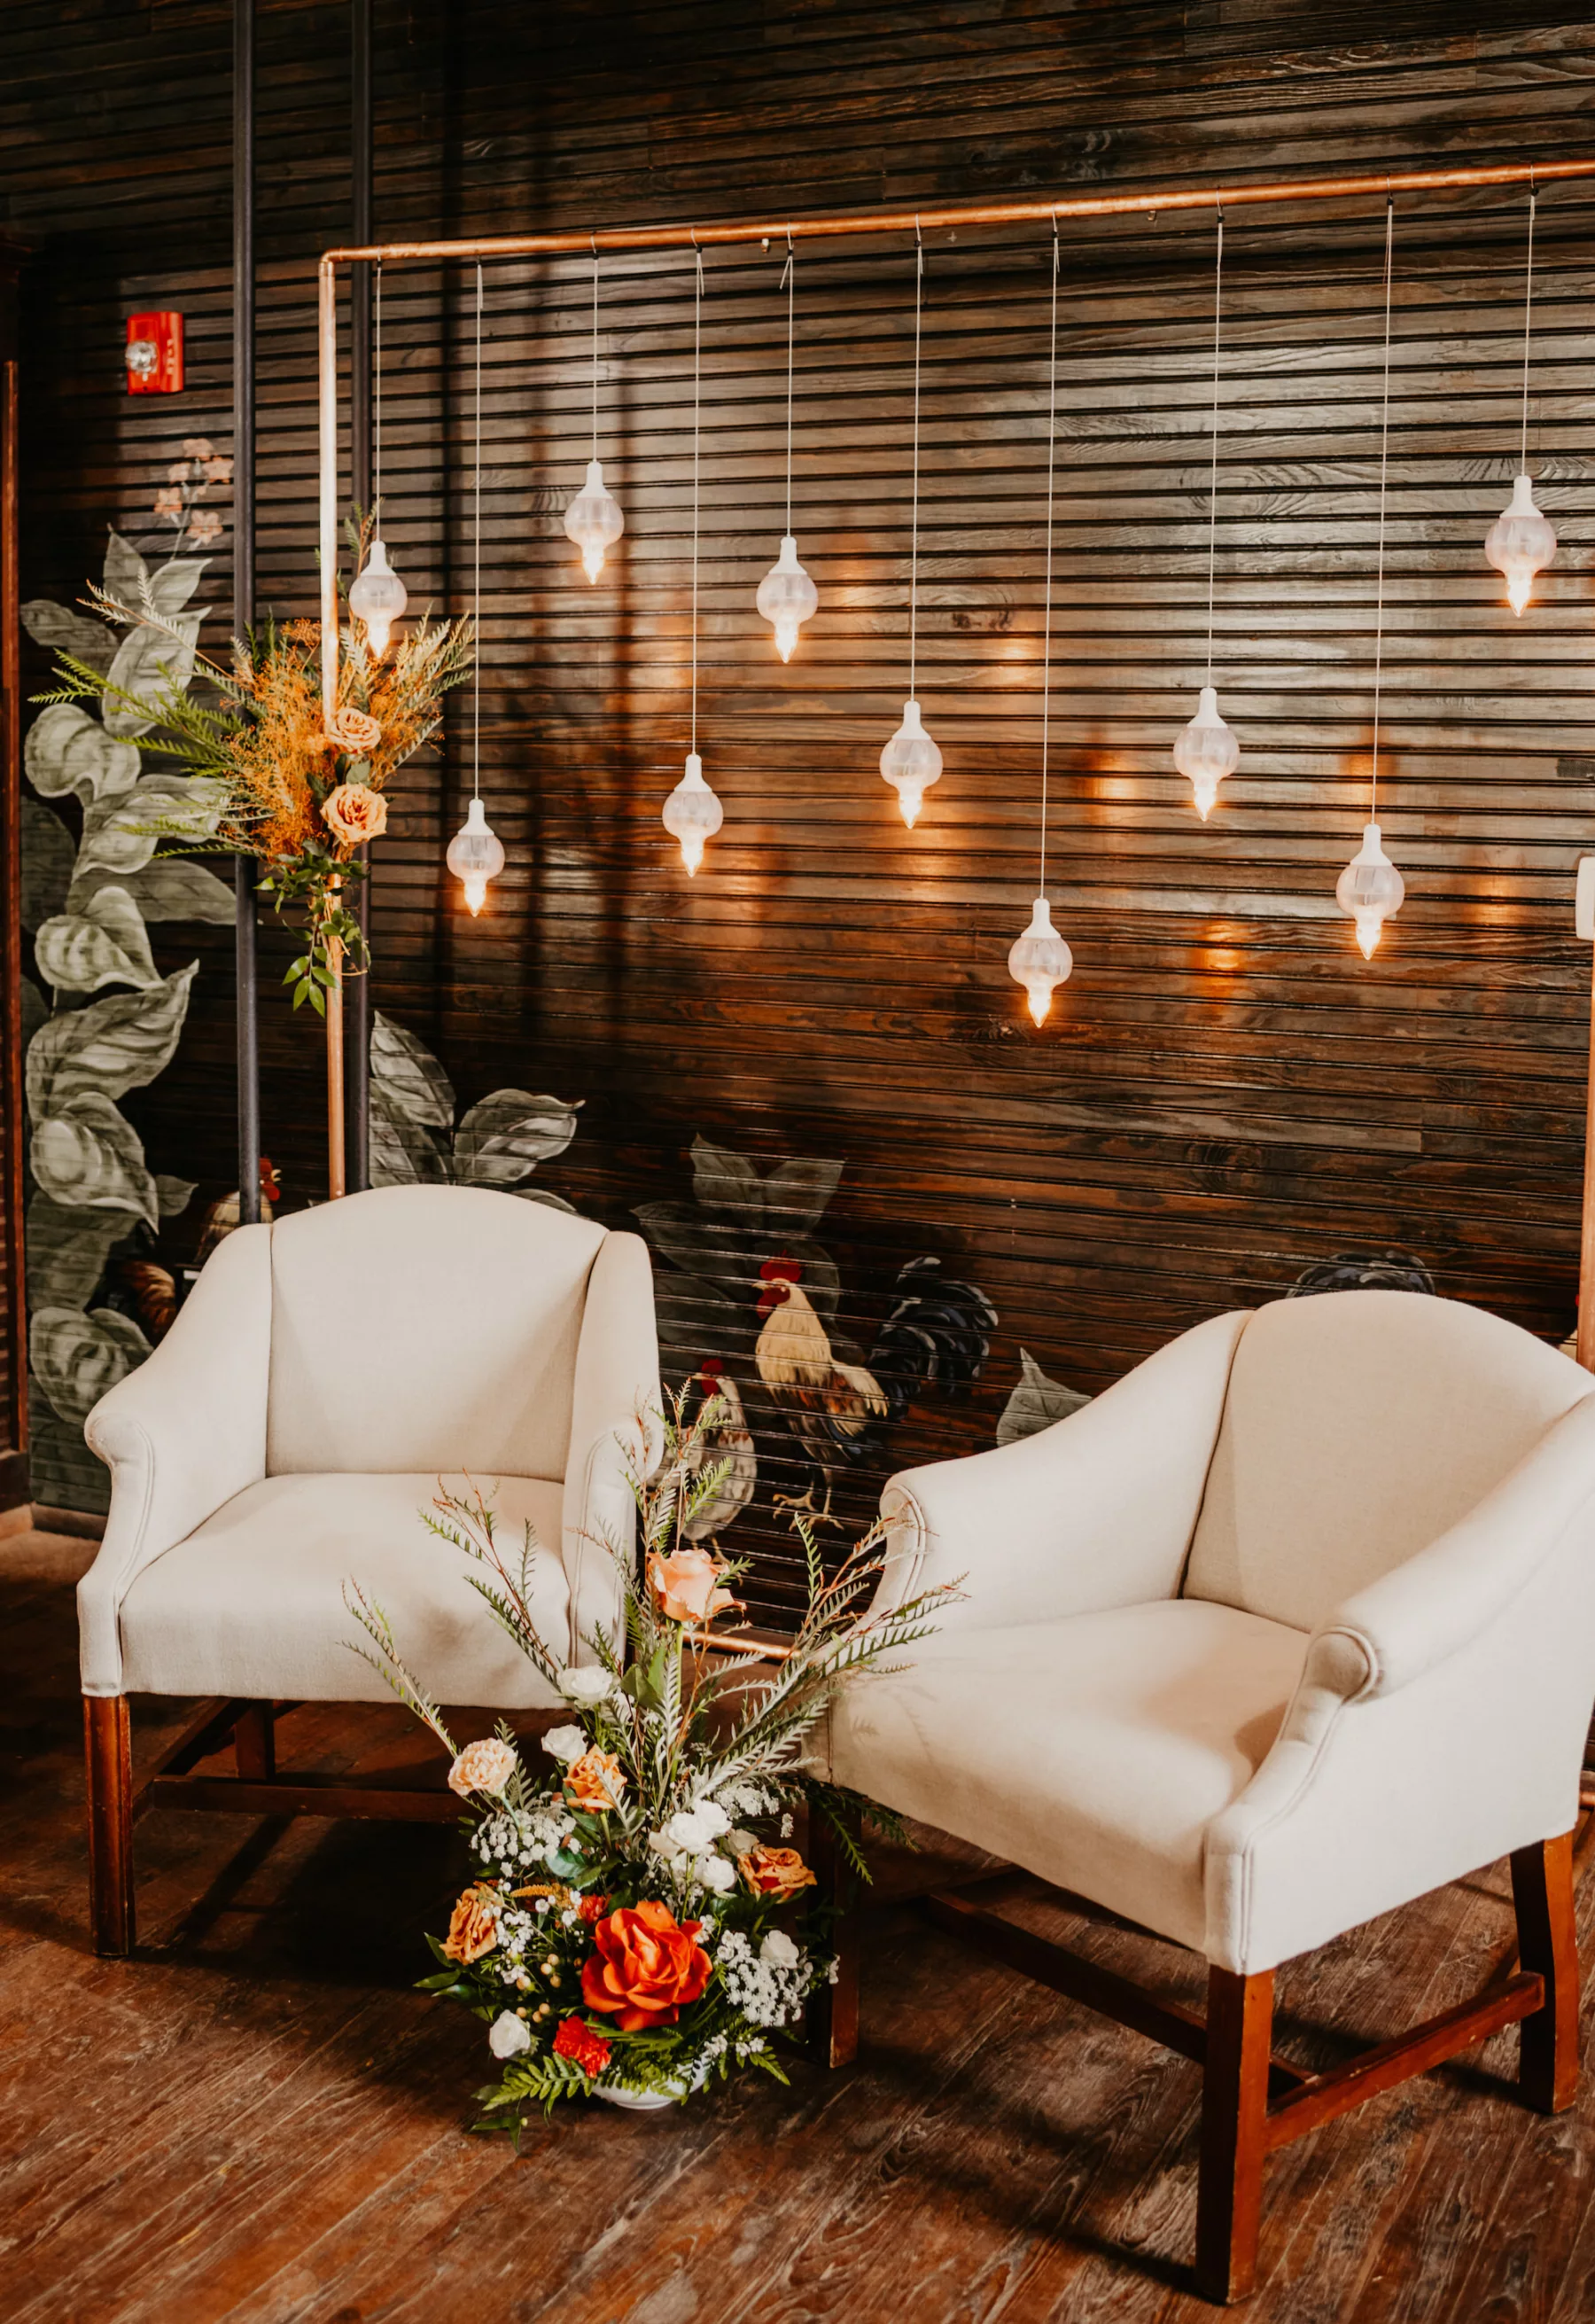 Neutral Beige Lounge Seating with Hanging Lights Backdrop for Industrial Wedding Reception Ideas